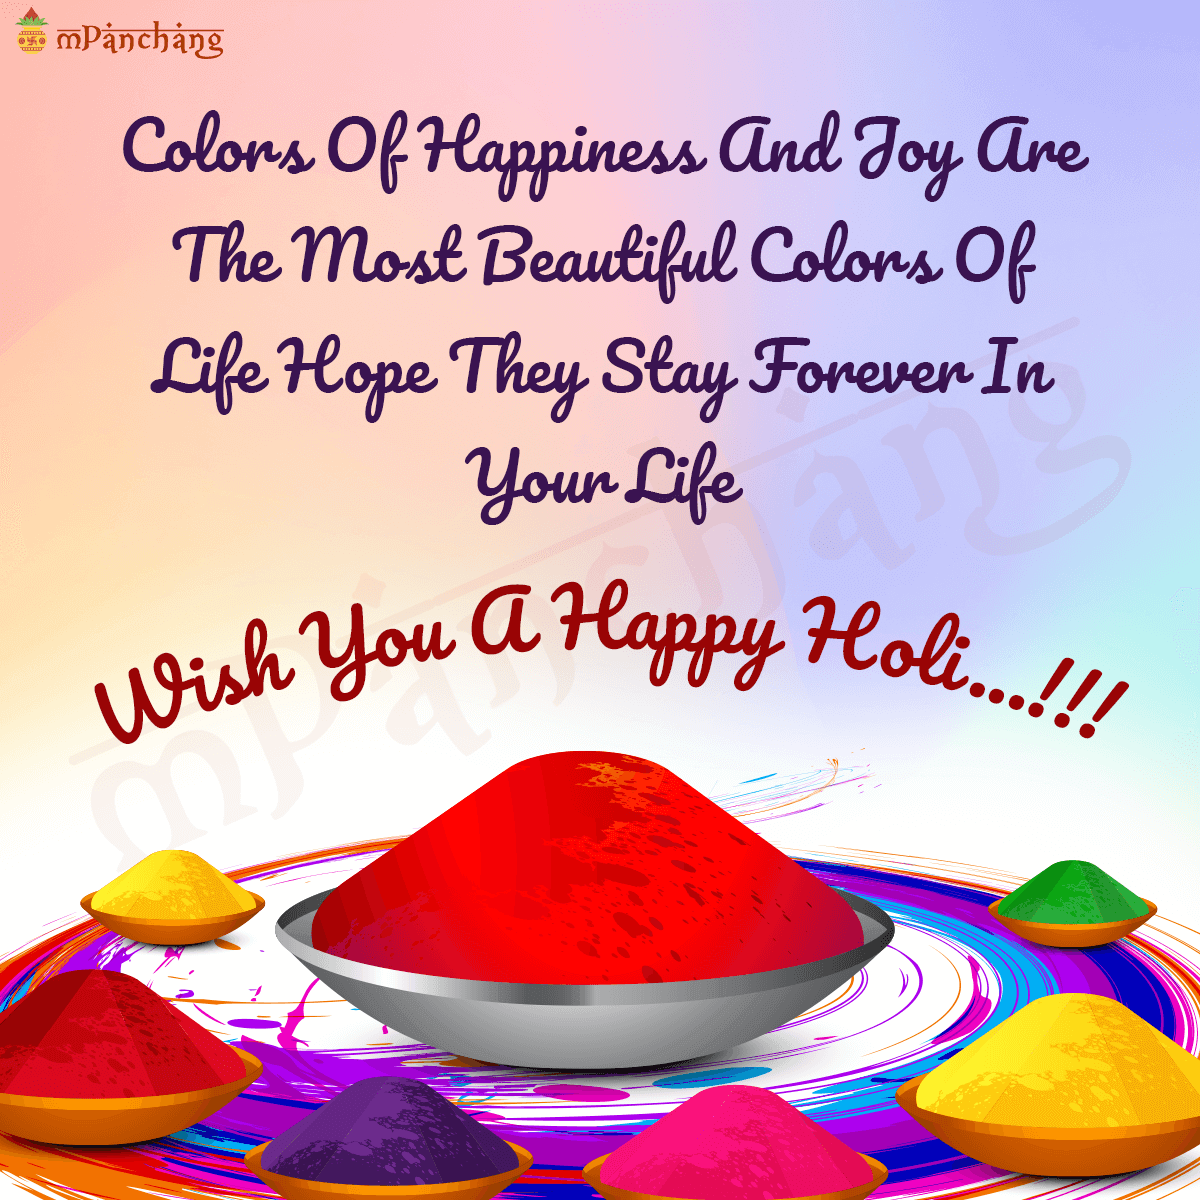 Ultimate Collection of 4K Holi Wishes Images – Over 999+ Incredible Holi Wishes Images